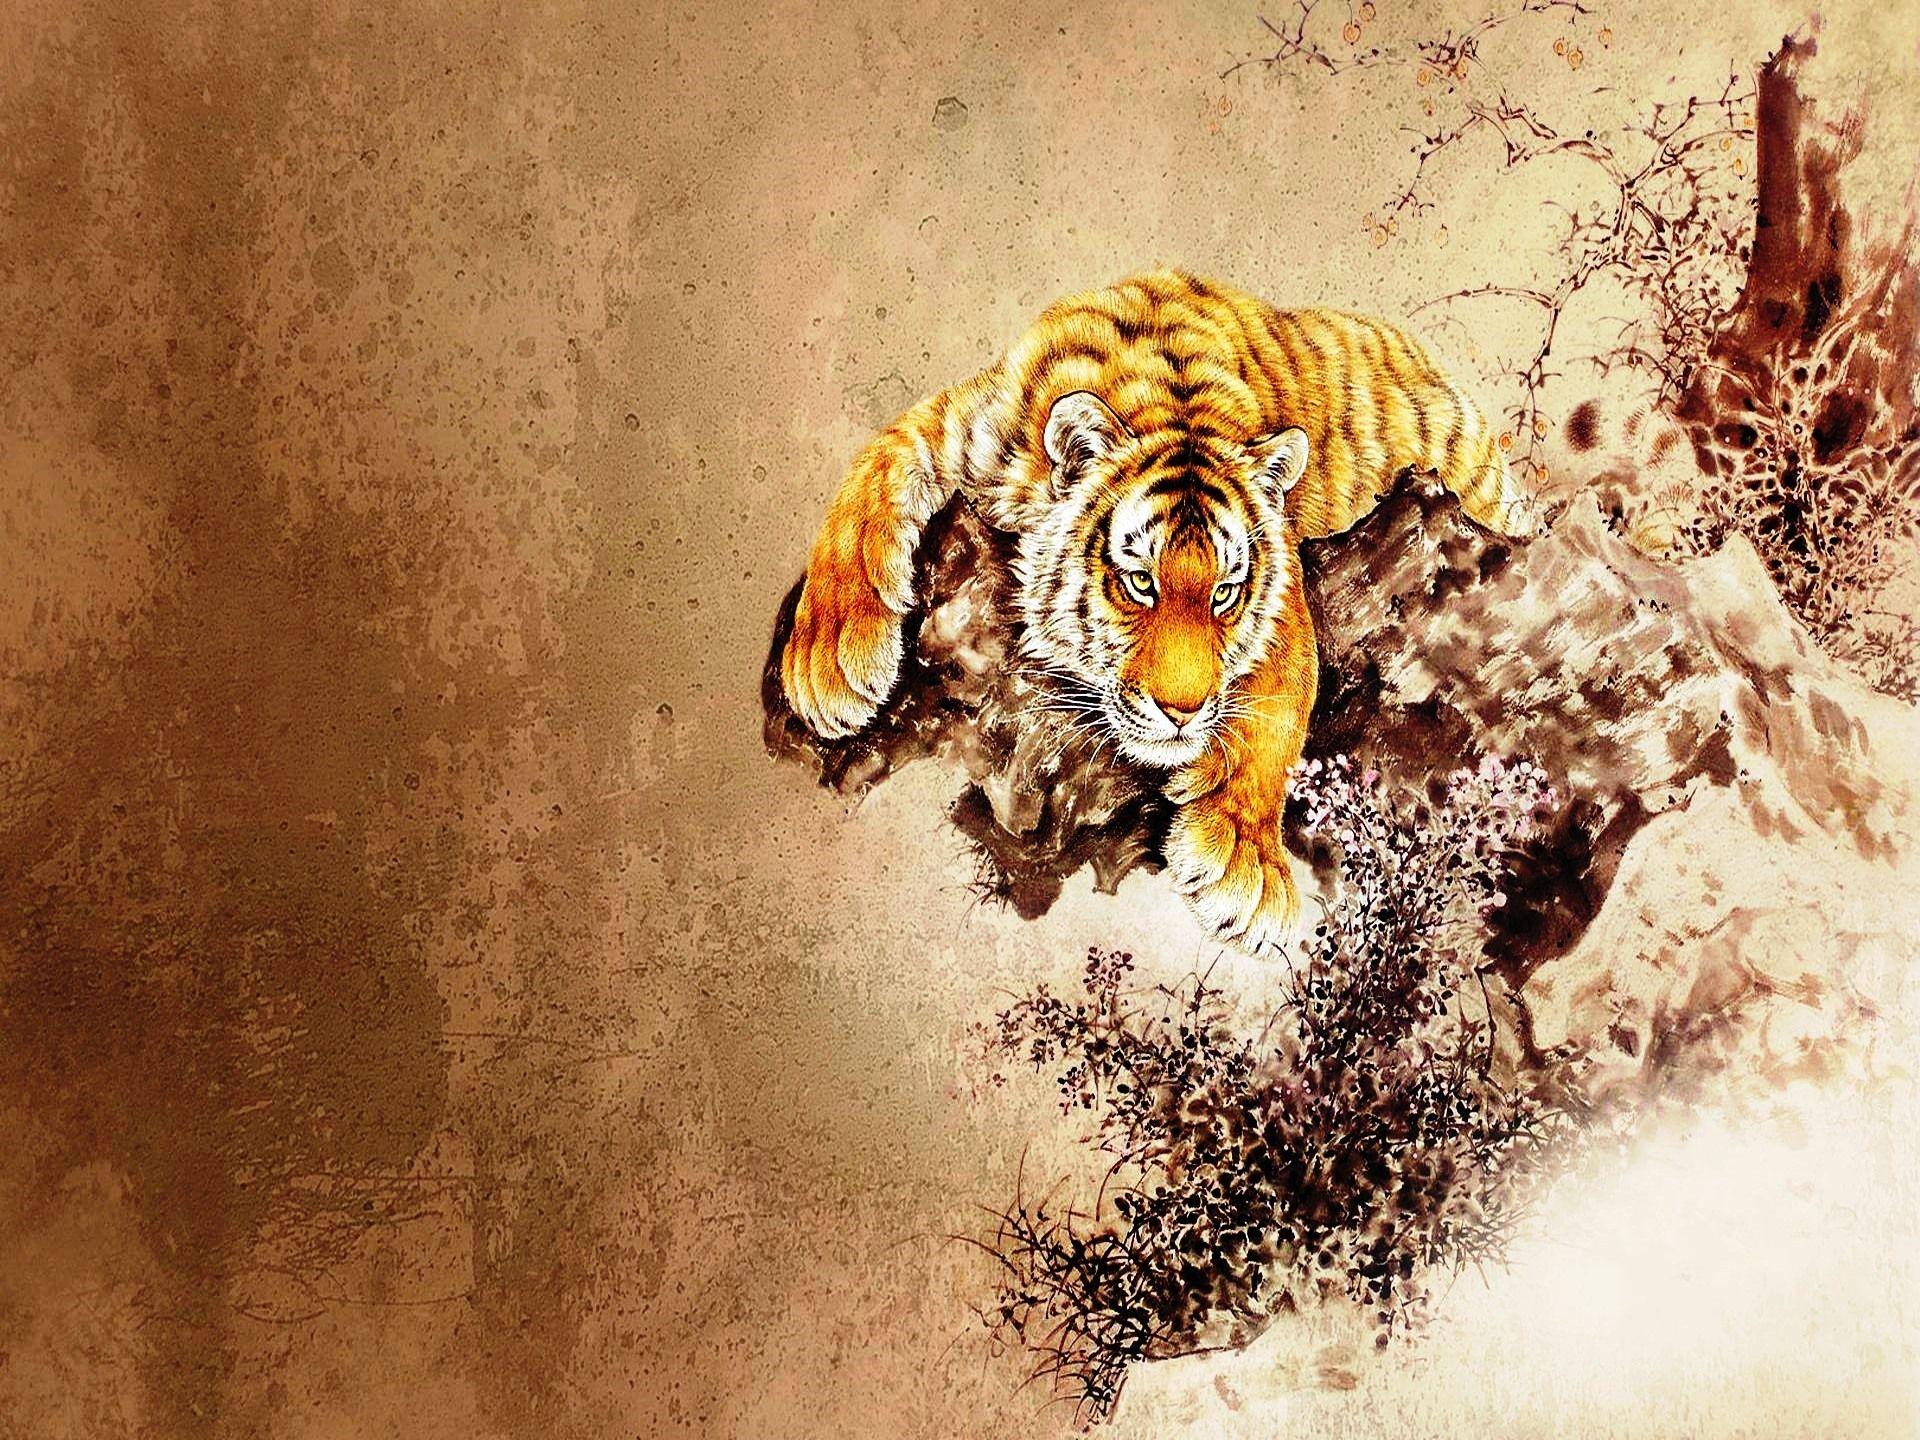 Chinese Tiger Wallpaper Free Chinese Tiger Background